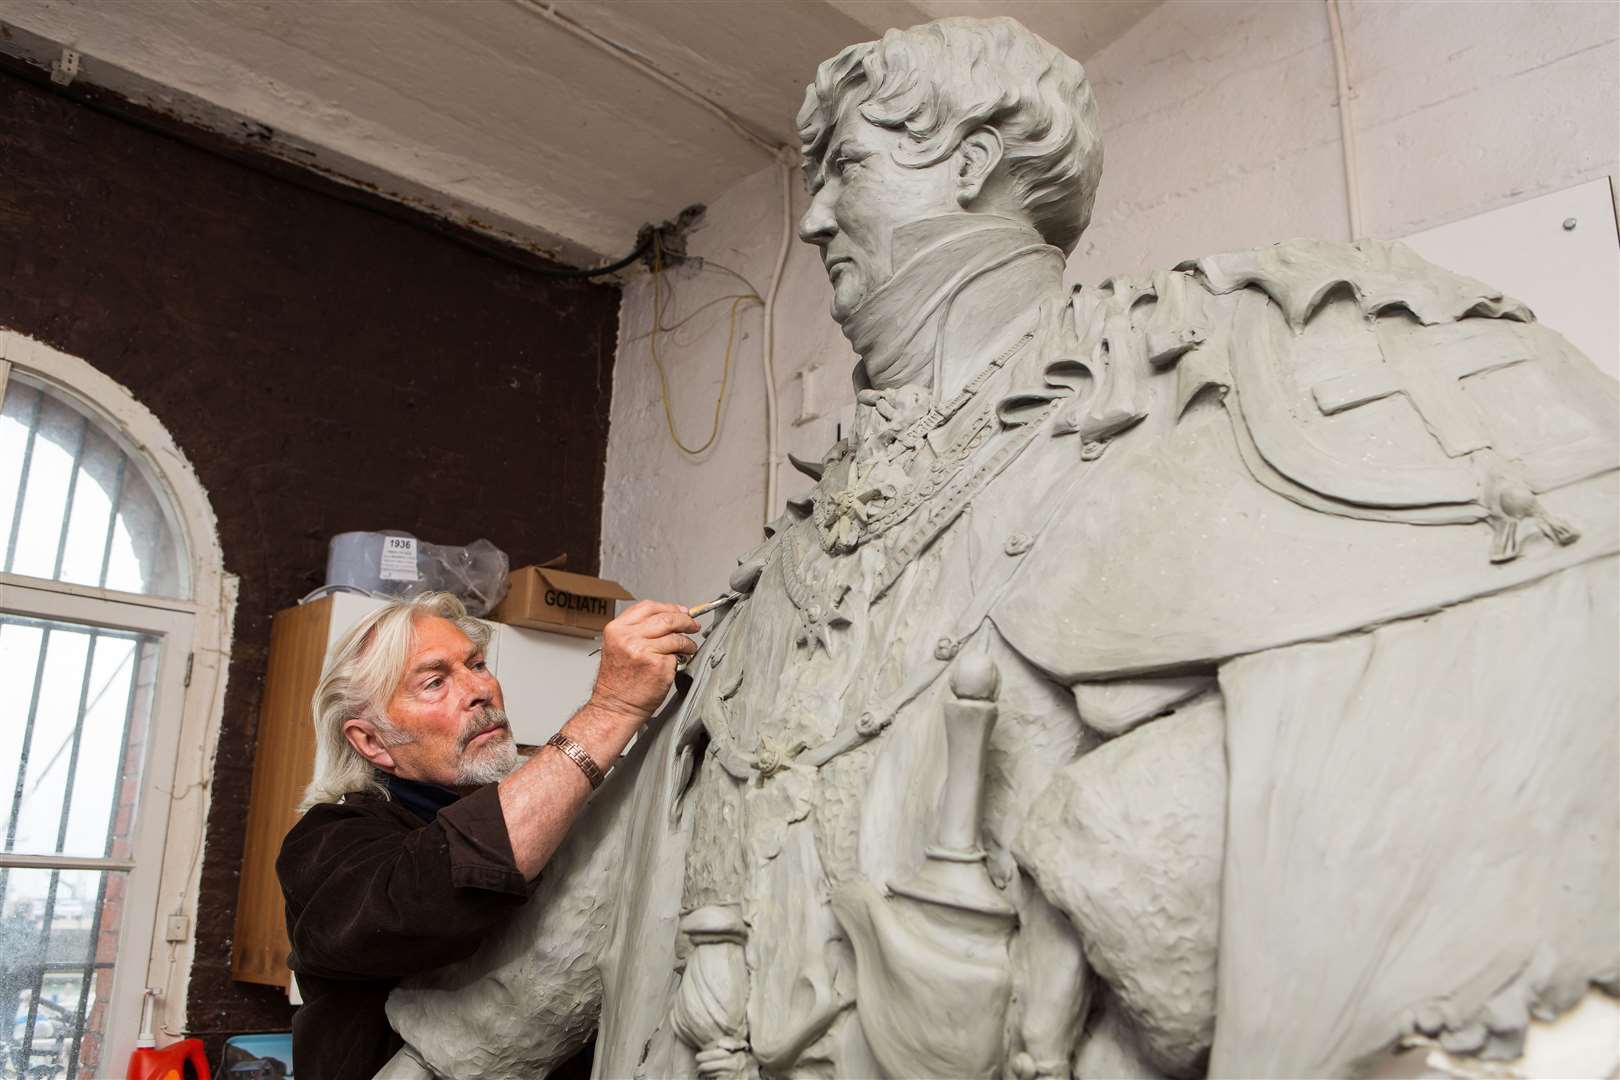 Award-winning sculptor Dominic Grant, who lived in Ramsgate, died suddenly in November 2020 before completing the King George IV statue. Picture: Royal Harbour 200th Anniversary Festival